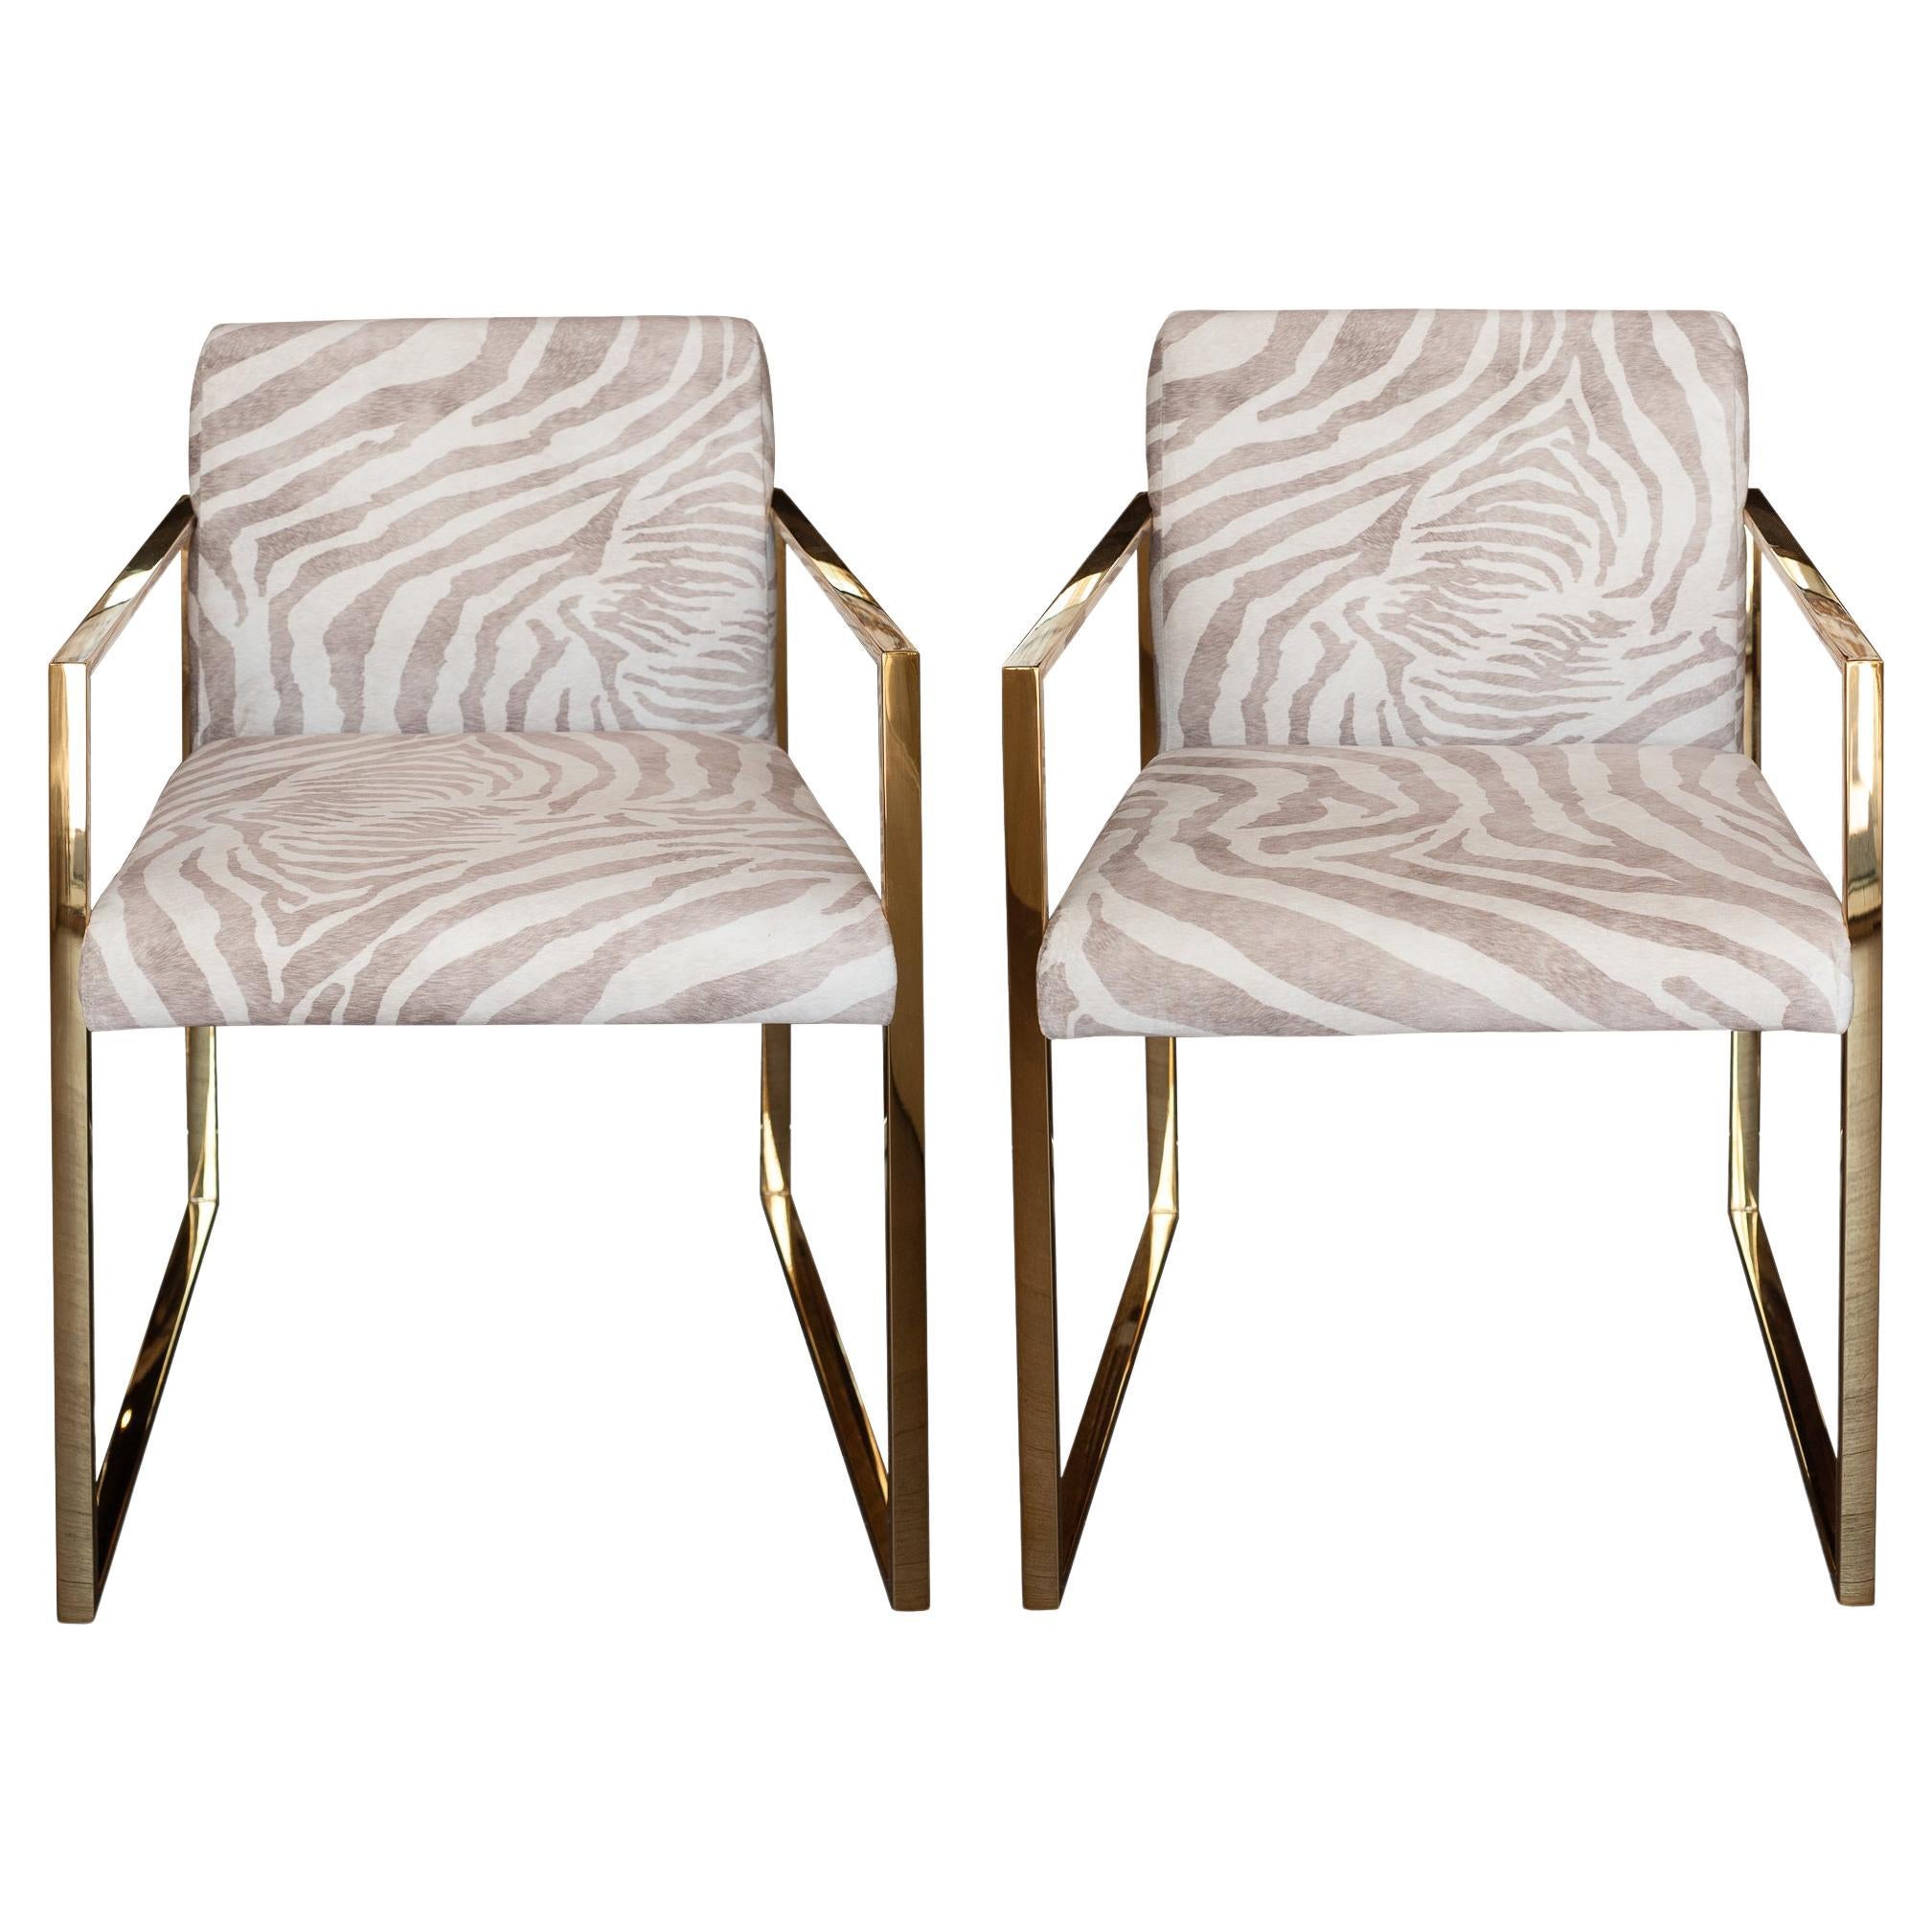 Contemporary Pair of Polished Brass and Zebra-Print Fabric Upholstered Armchairs